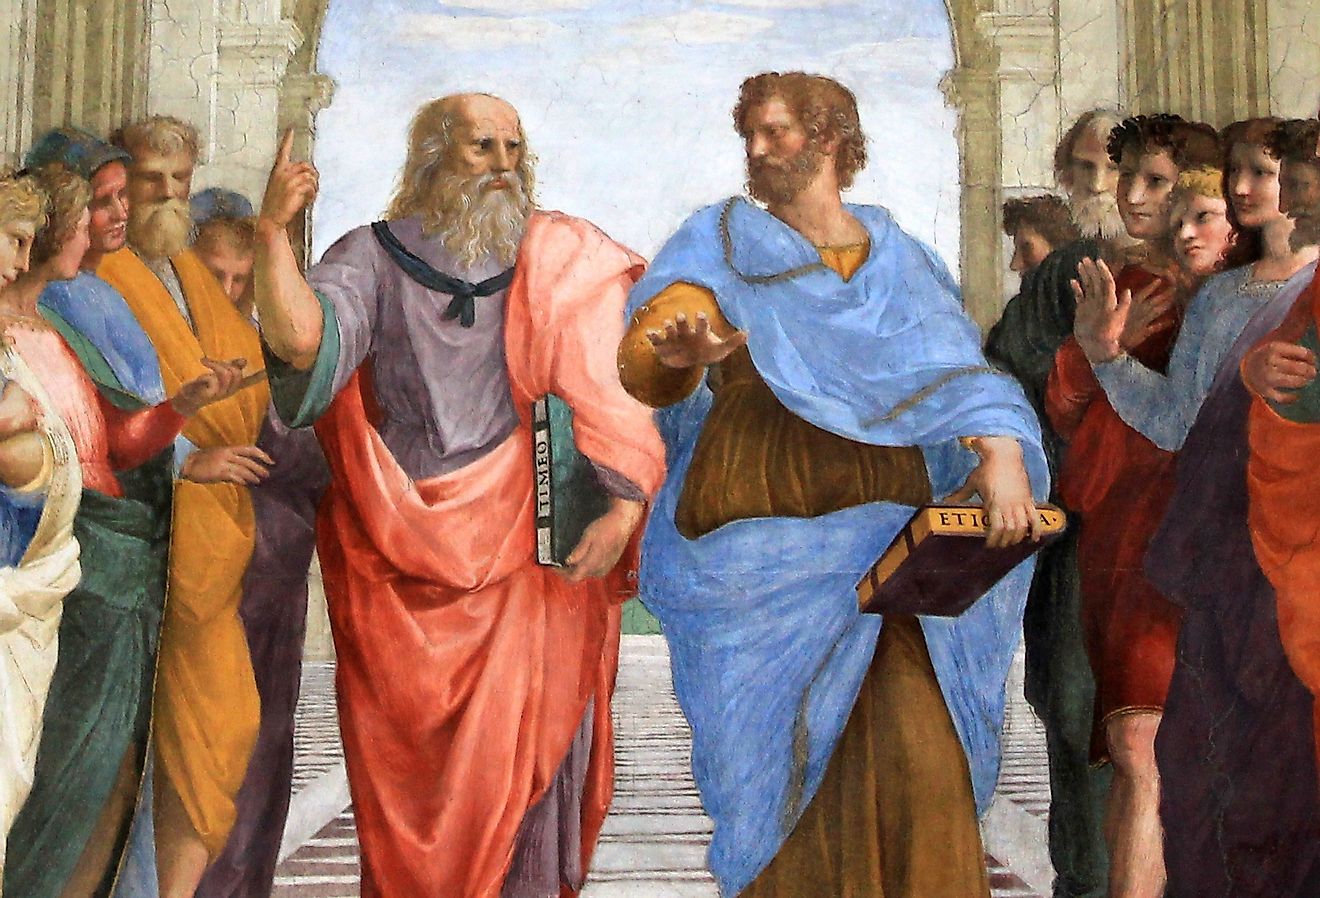 Detail of Plato on the left and Aristotle on the right, School of Athens.